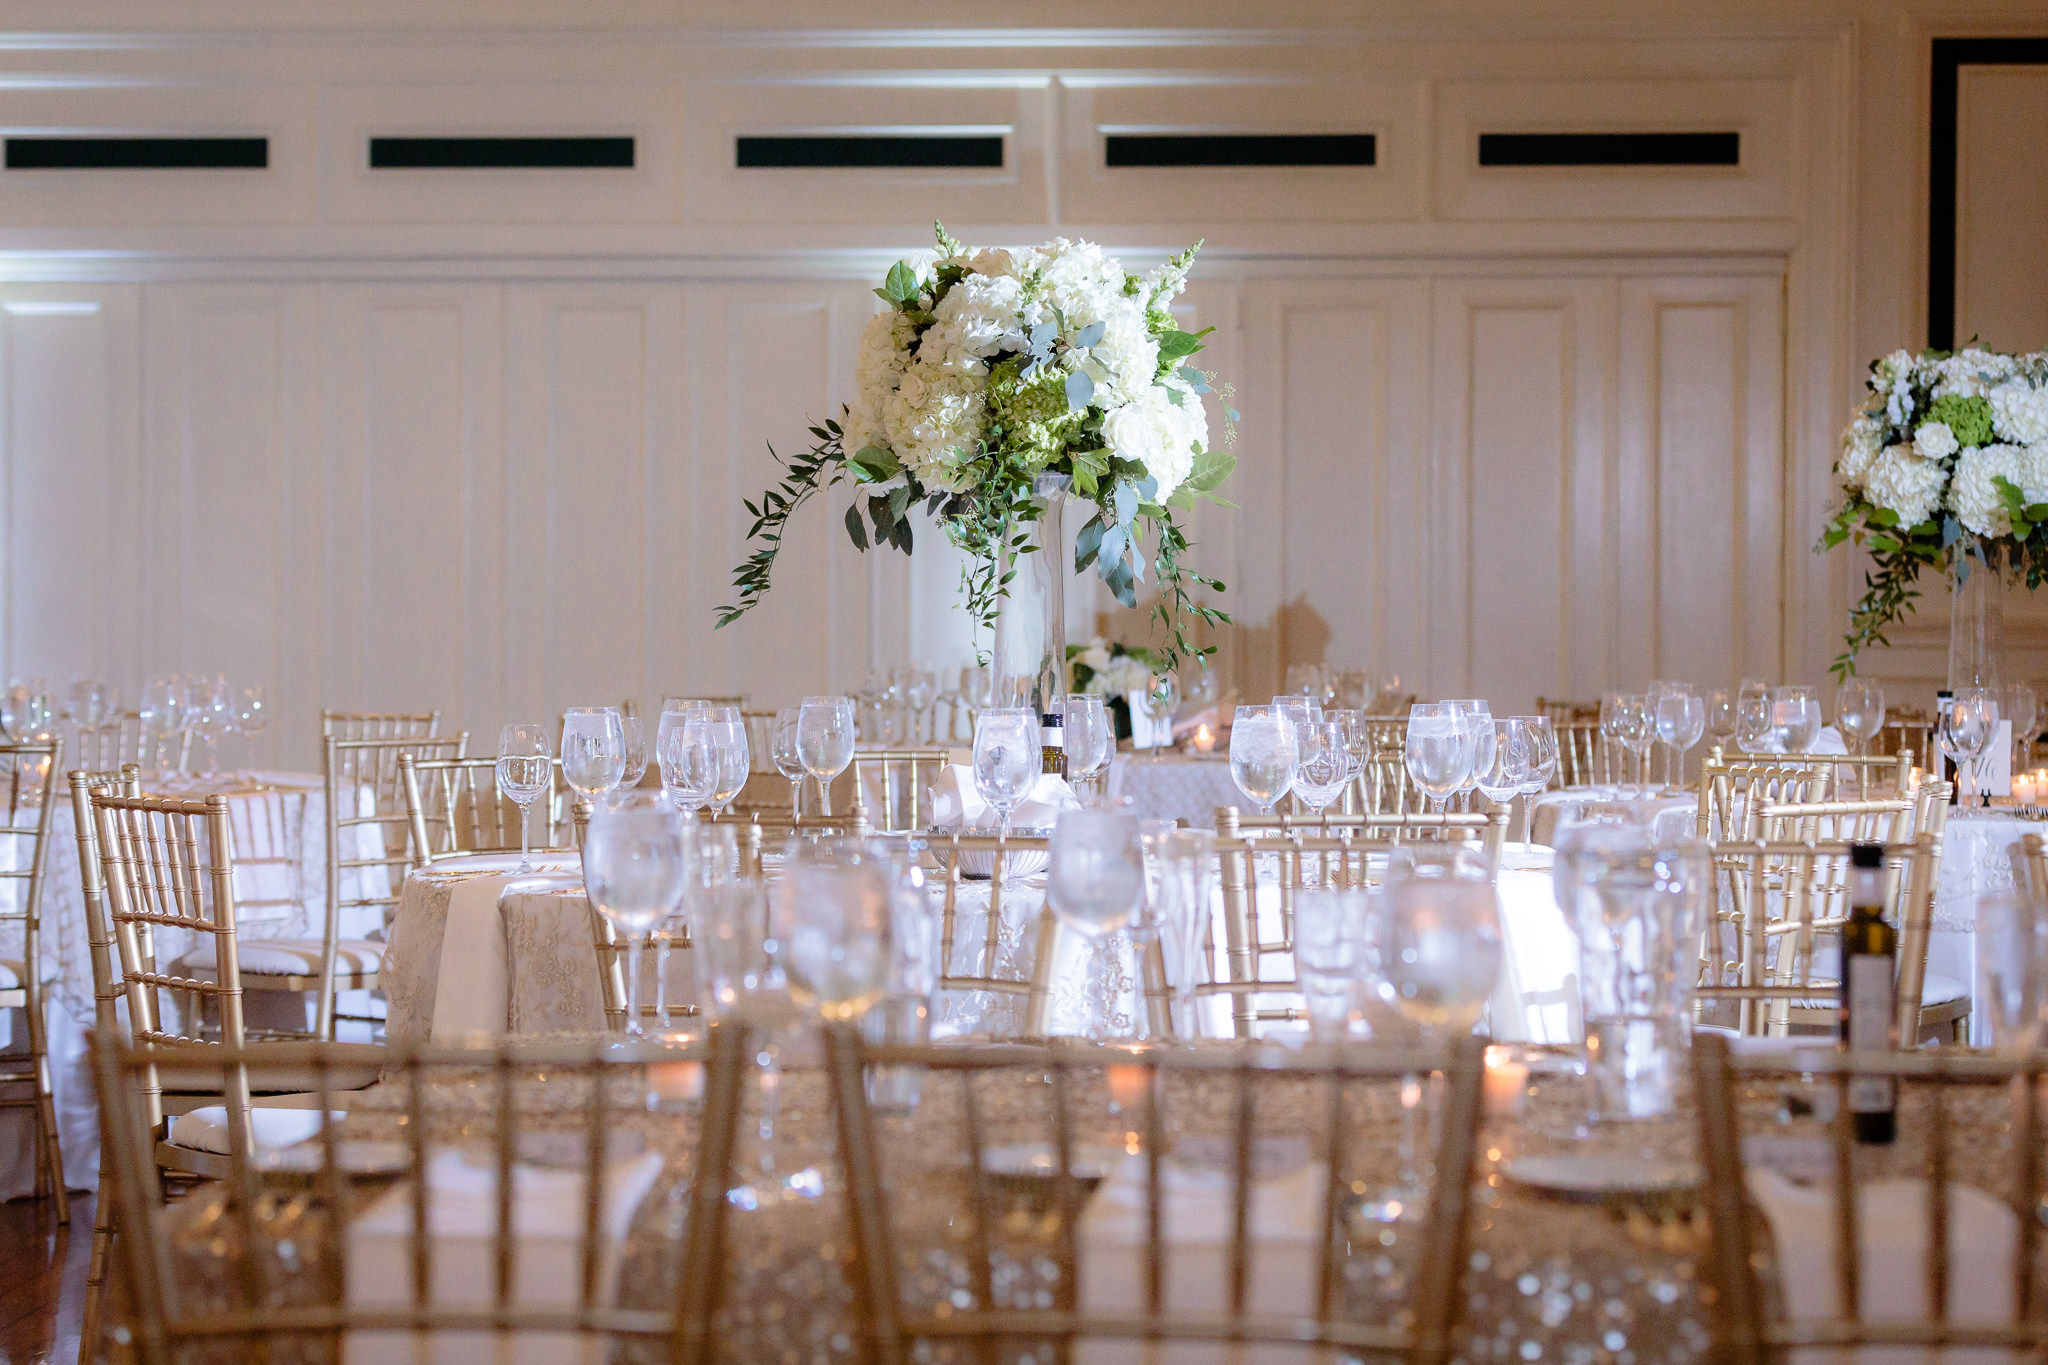 Tall white hydrangea centerpieces at a Soldiers & Sailors wedding reception